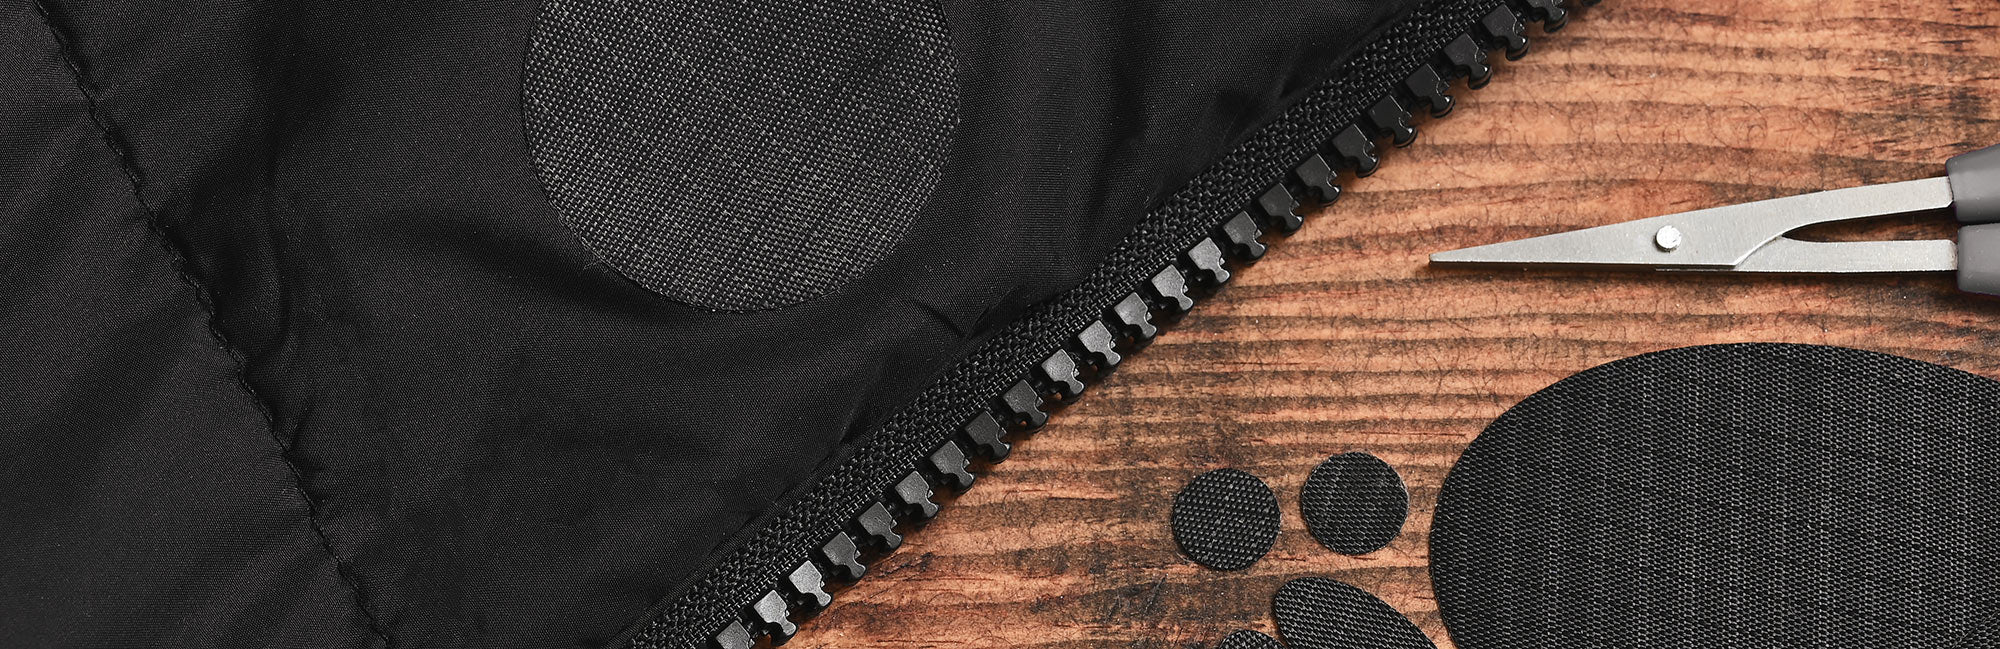 aZengear Down Jacket Repair Patches Pre-cut, Self-Adhesive, Soft,  Waterproof, Tear-Resistant Rip-Stop Nylon Fabric to Fix Holes